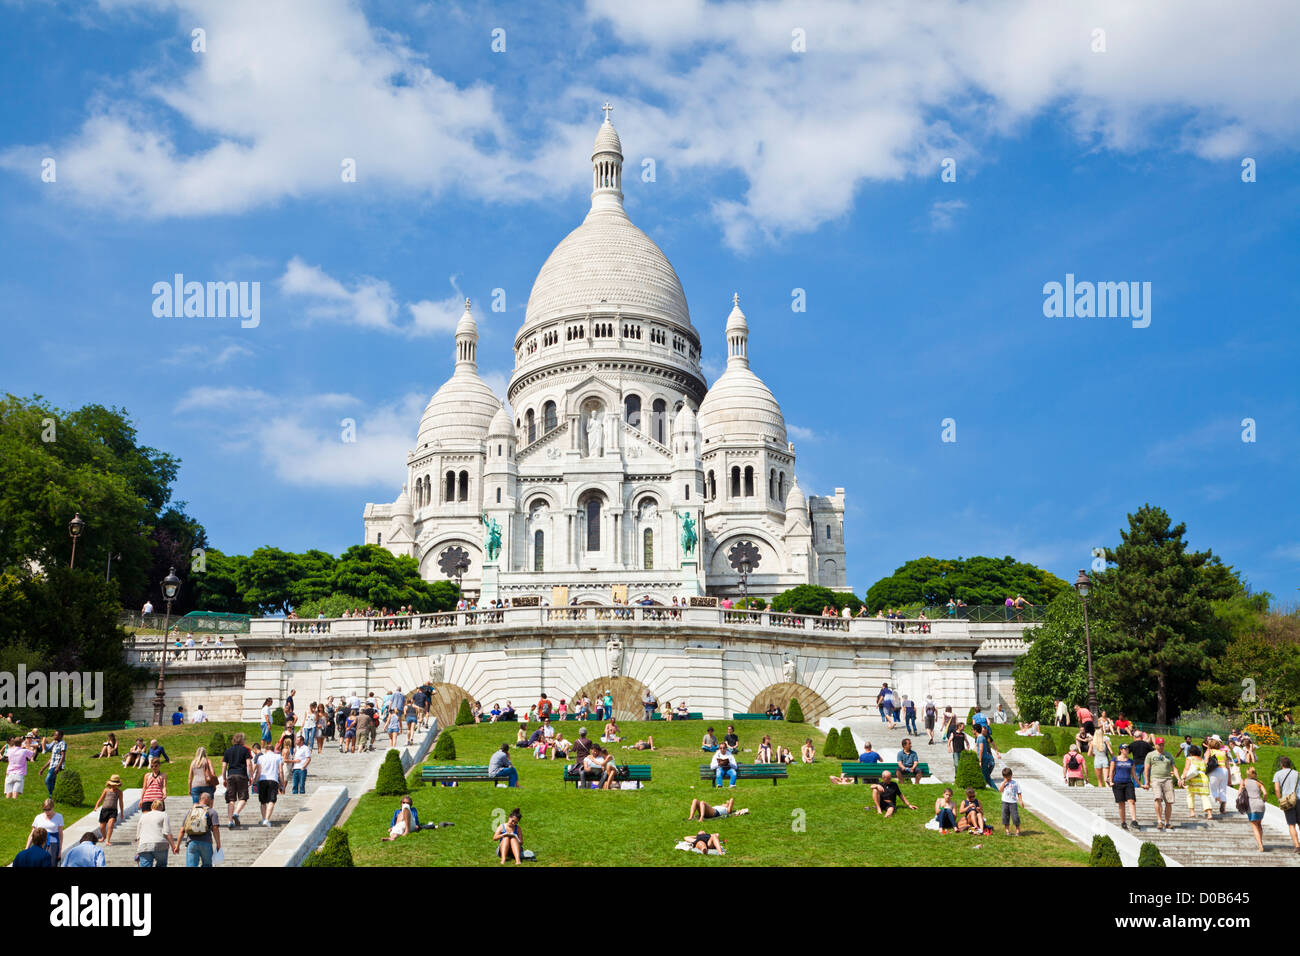 Crowds sat on the grass below Sacre Coeur in the Square Louise Michel Paris France EU Europe Stock Photo